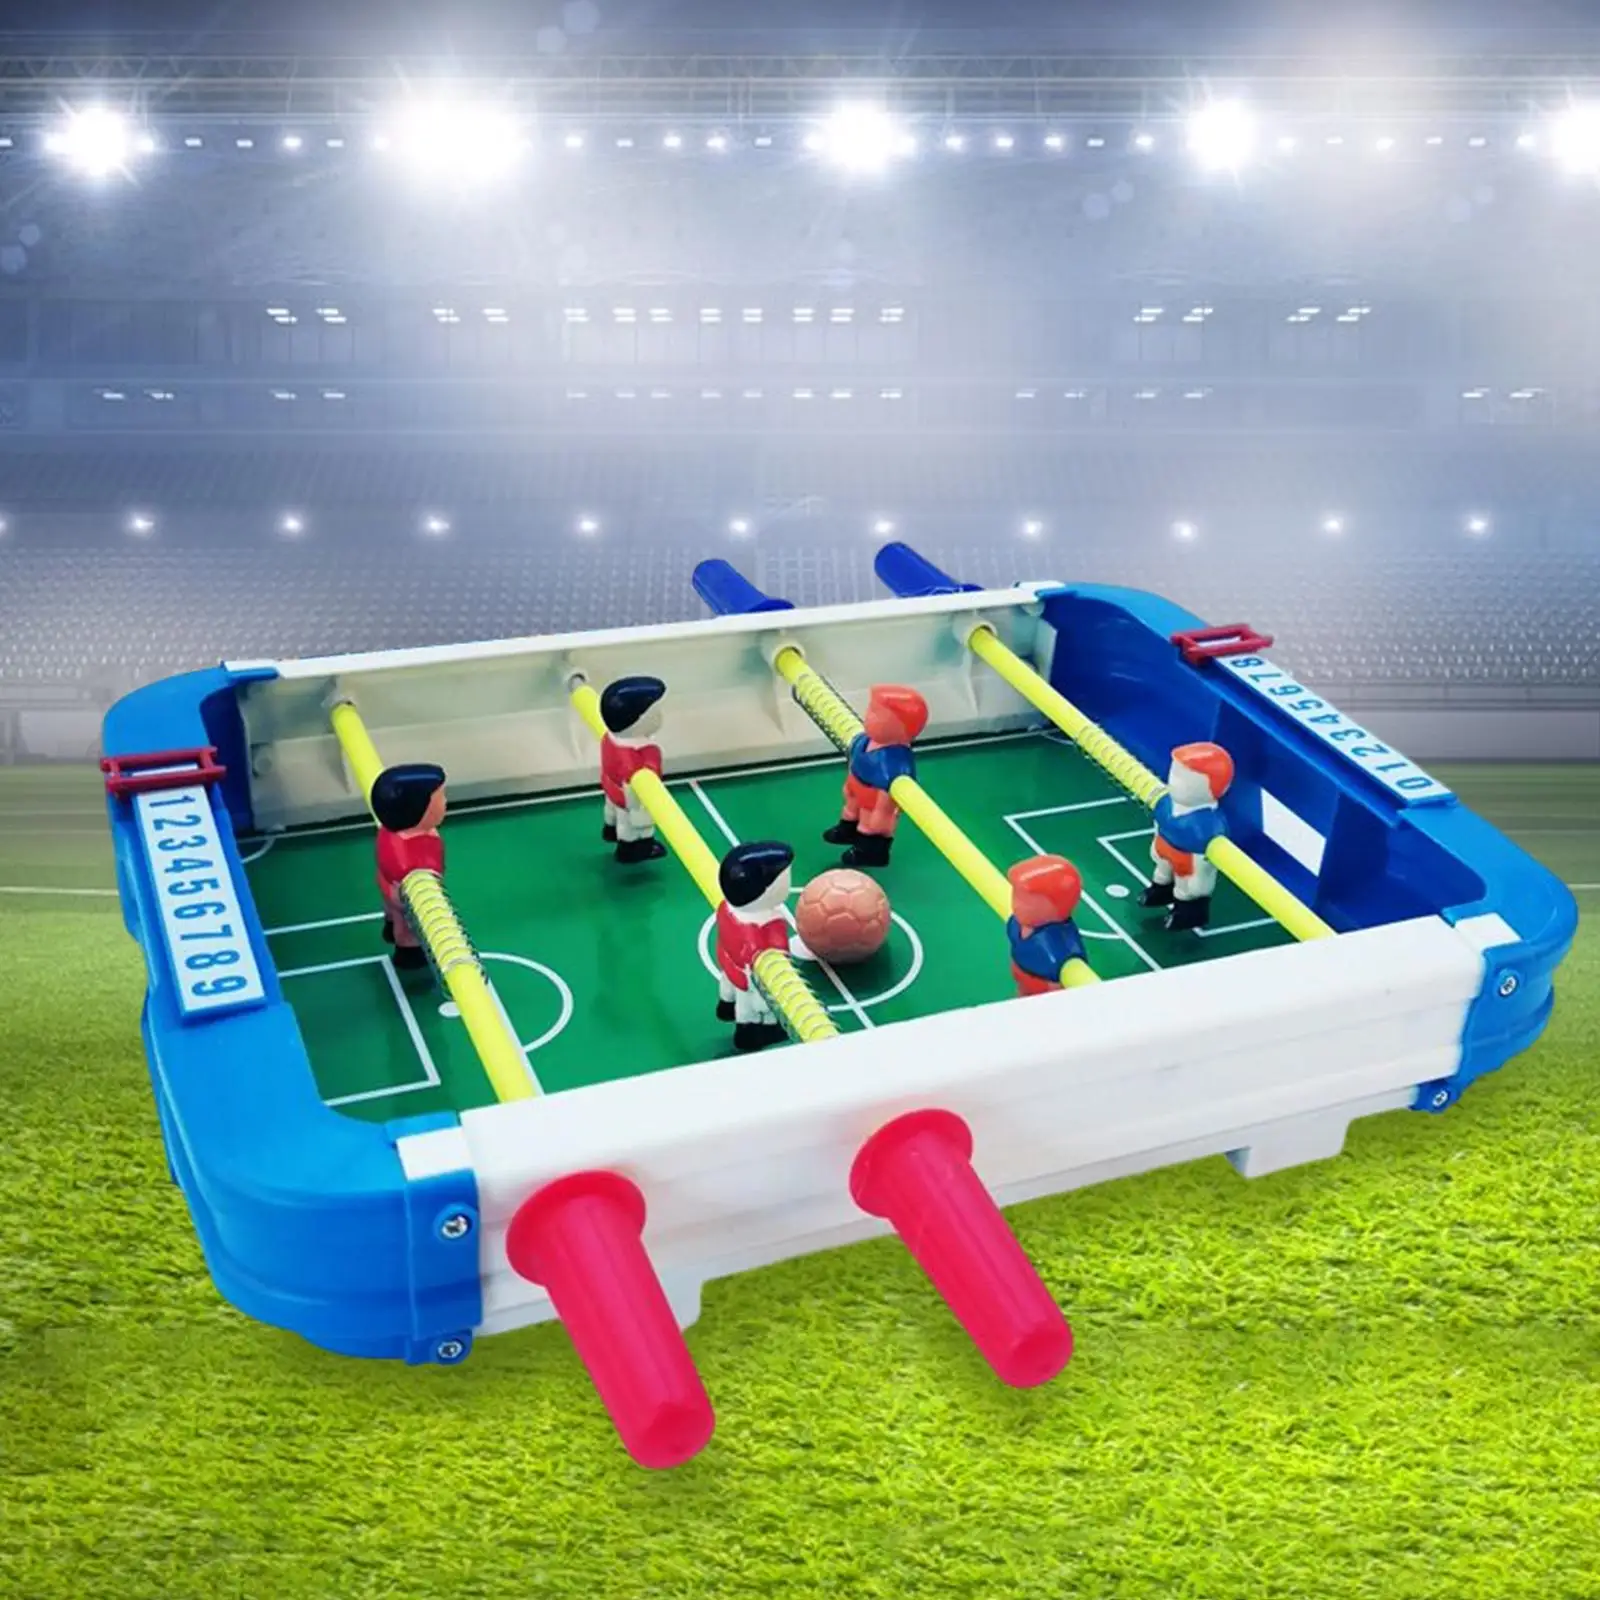 Small Foosball Table Tabletop Football Games Family Game for Birthday Gifts